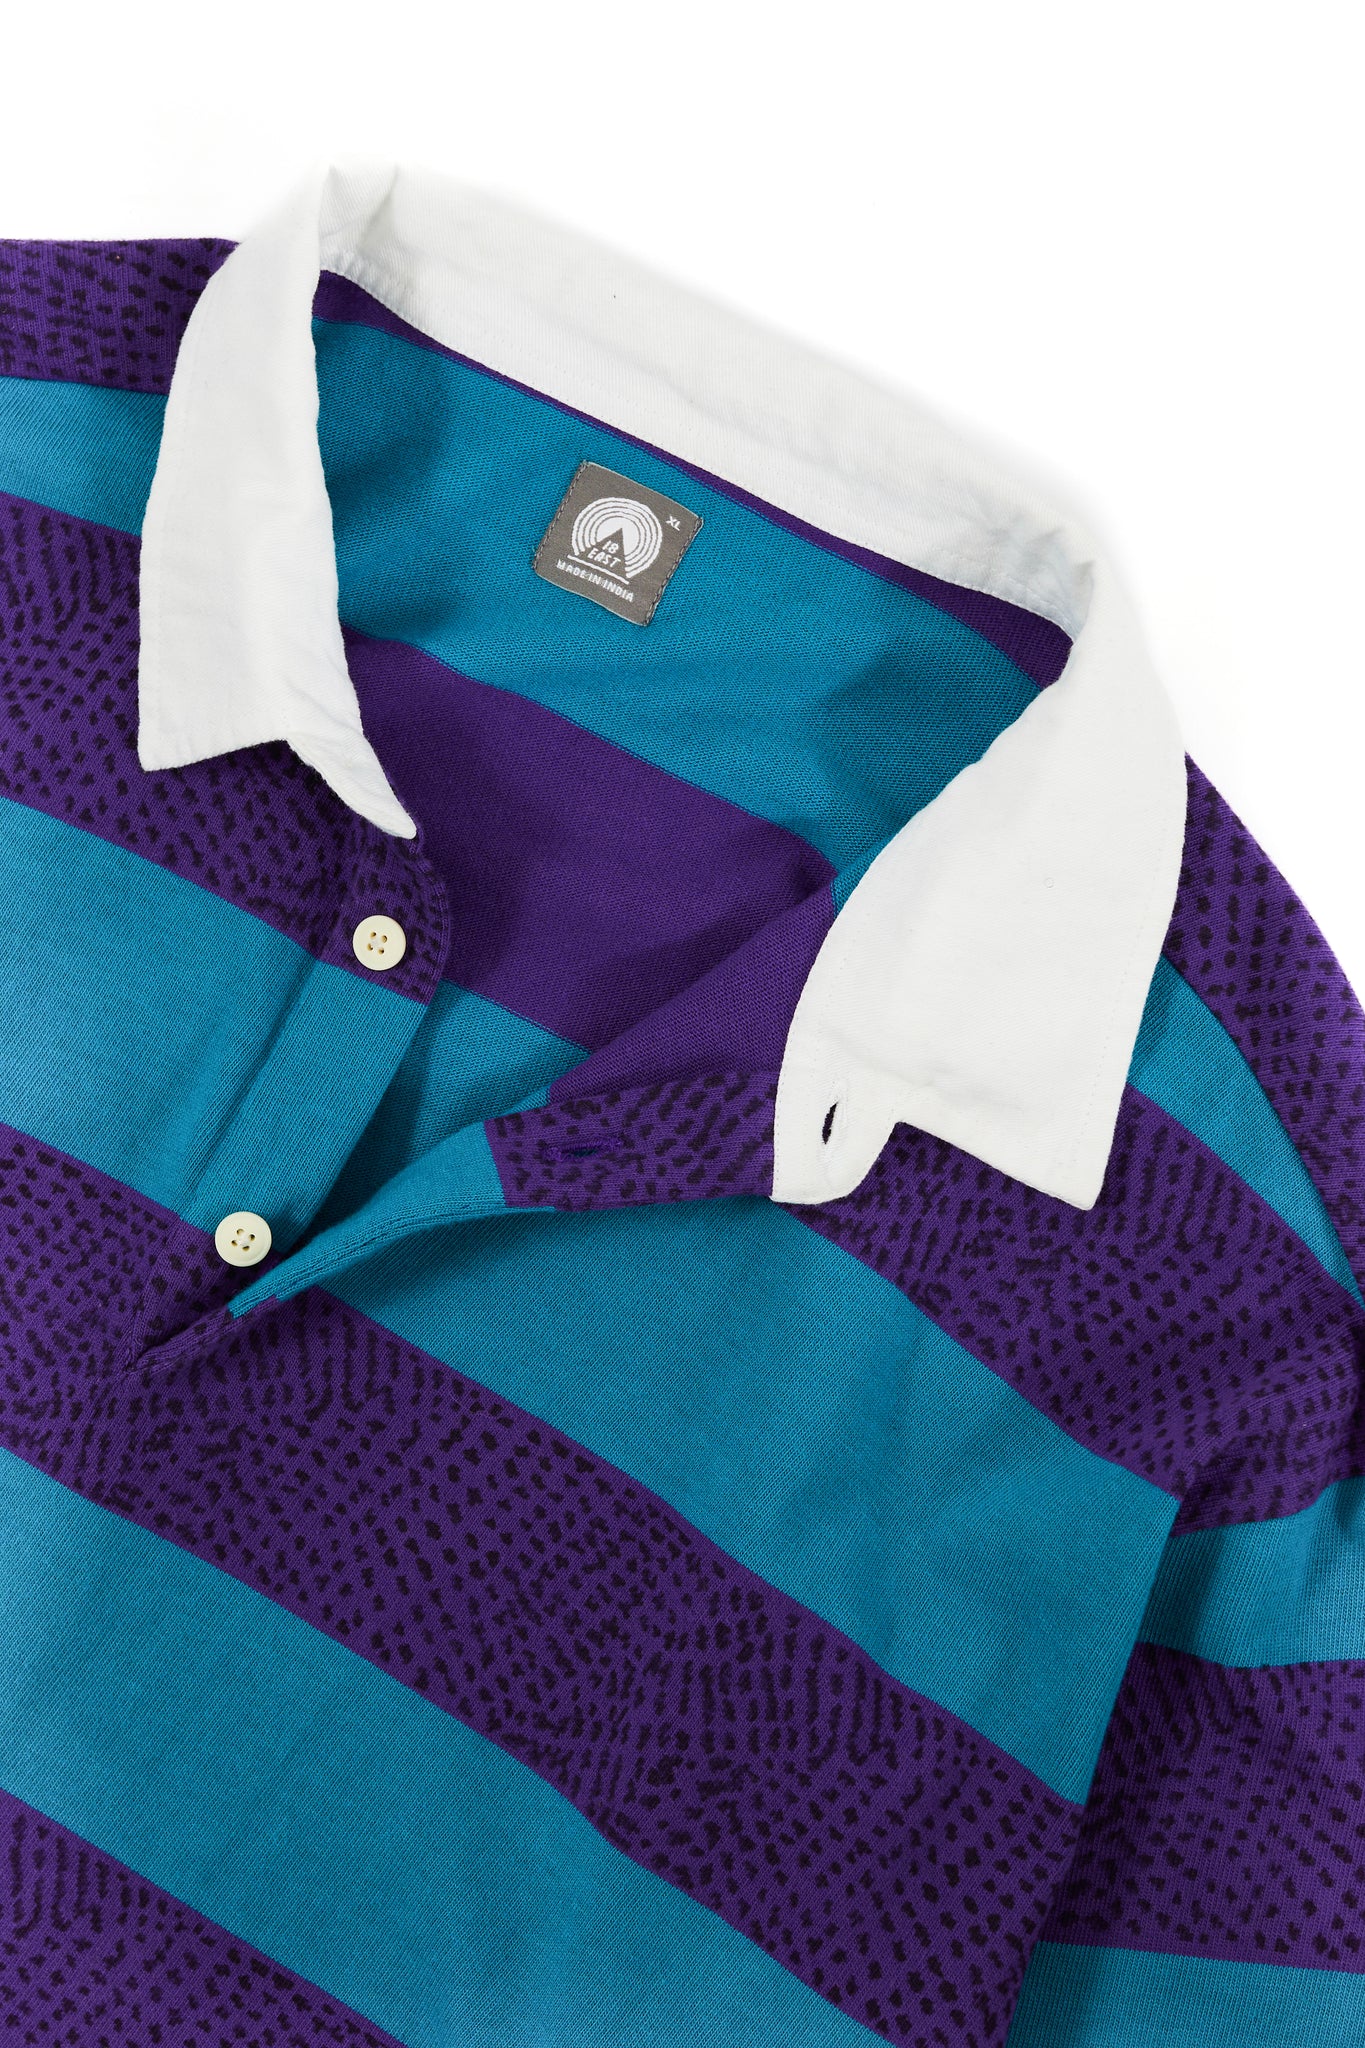 FISKE L/S RUGBY - TEAL / PURPLE COTTON PRACTICE JERSEY